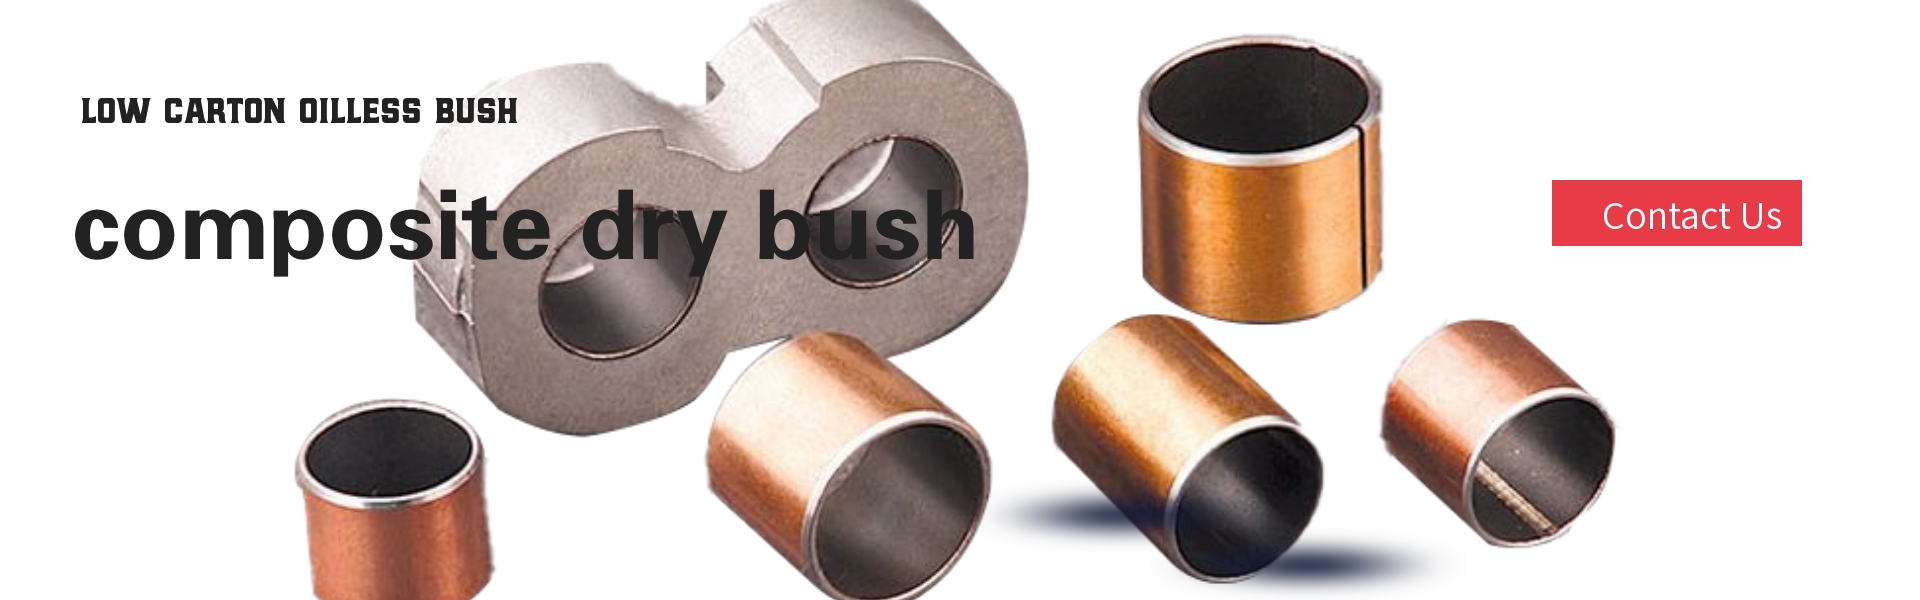 Guide PAF PAP Self Lubricating Plain Bearing Steel Copper Sleeve Bushes PTFE Coated Bushing 